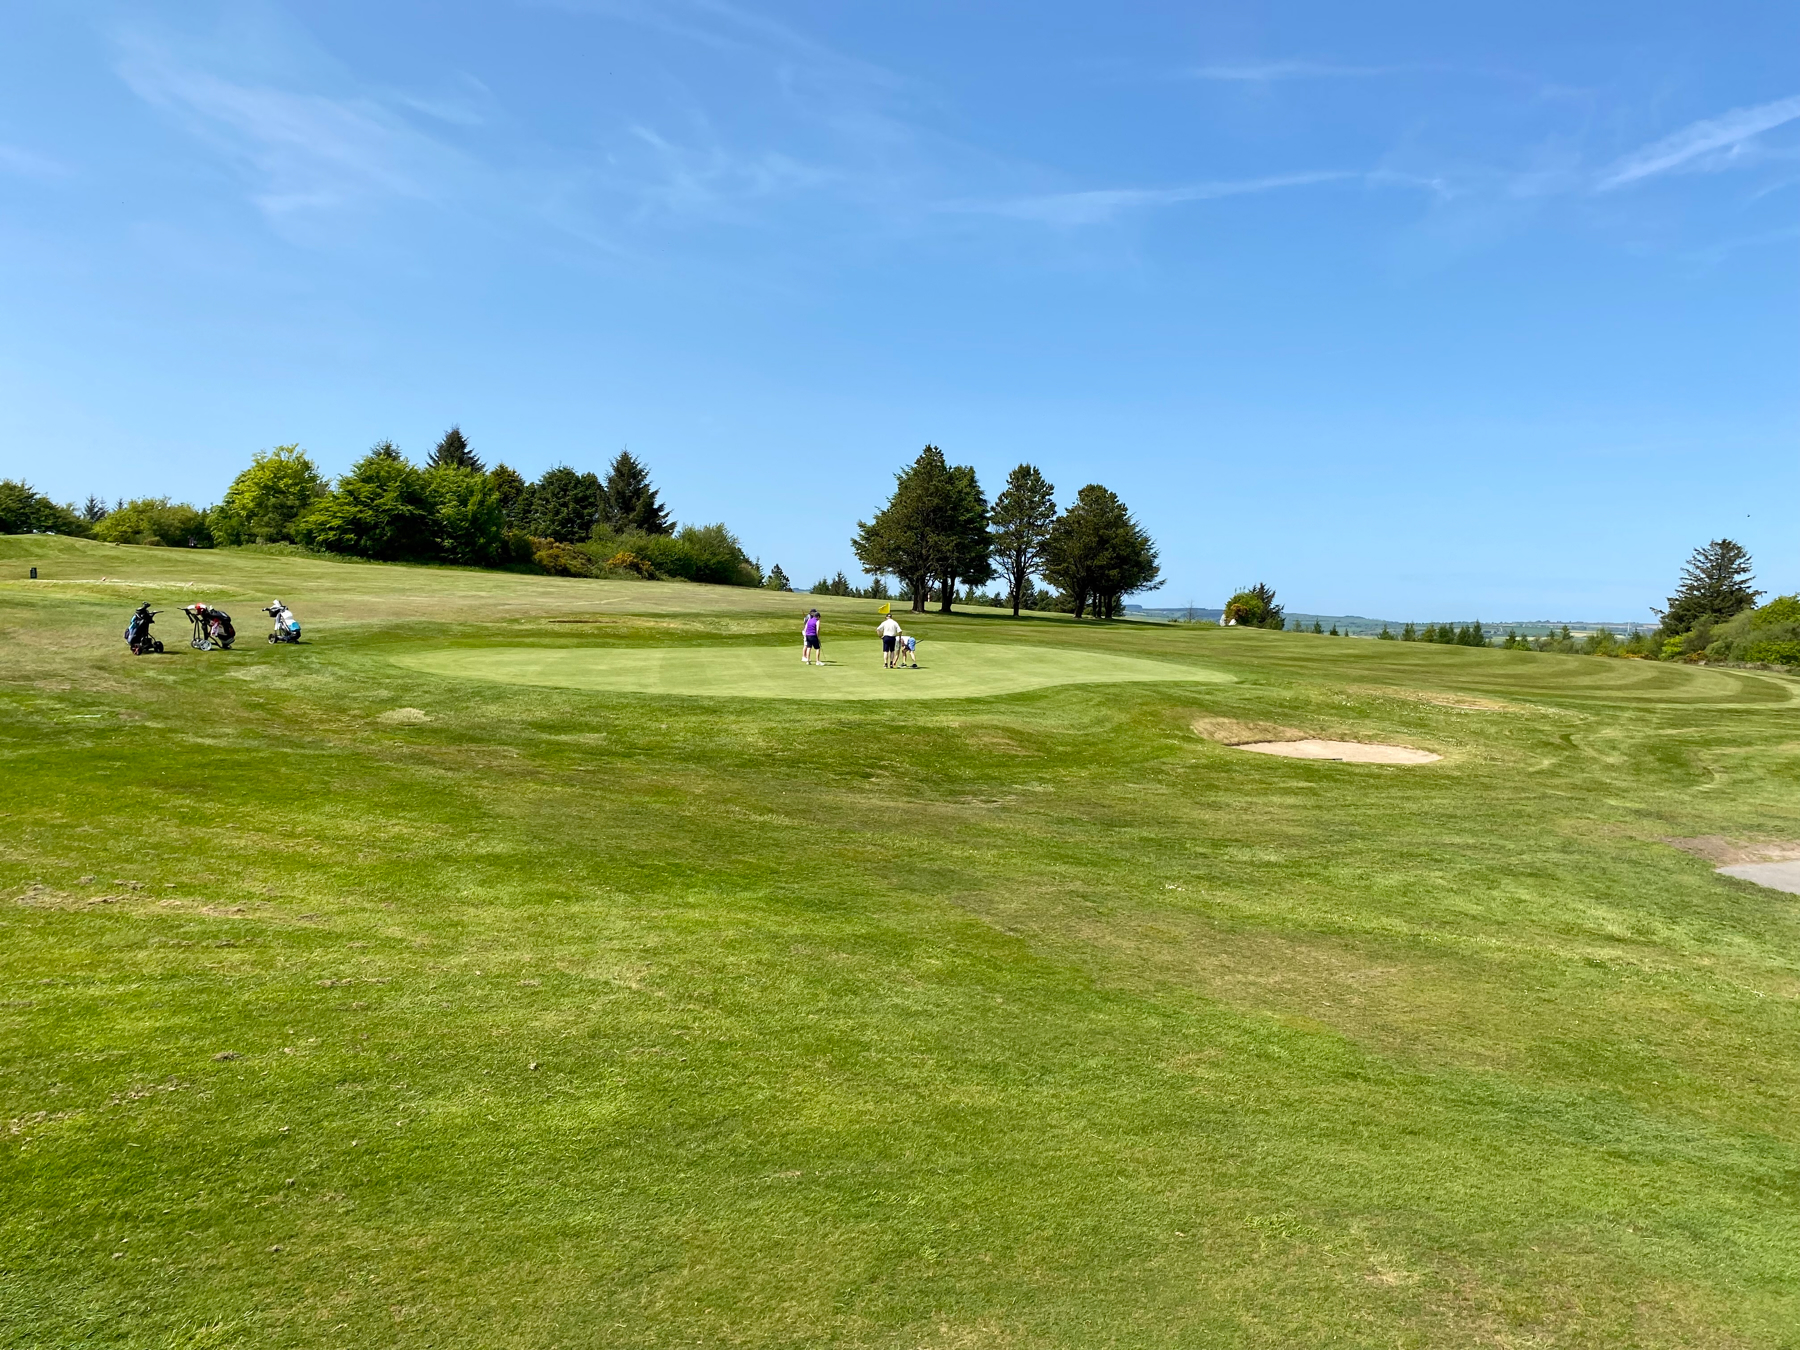 View over a golf course and green, blue skies above.